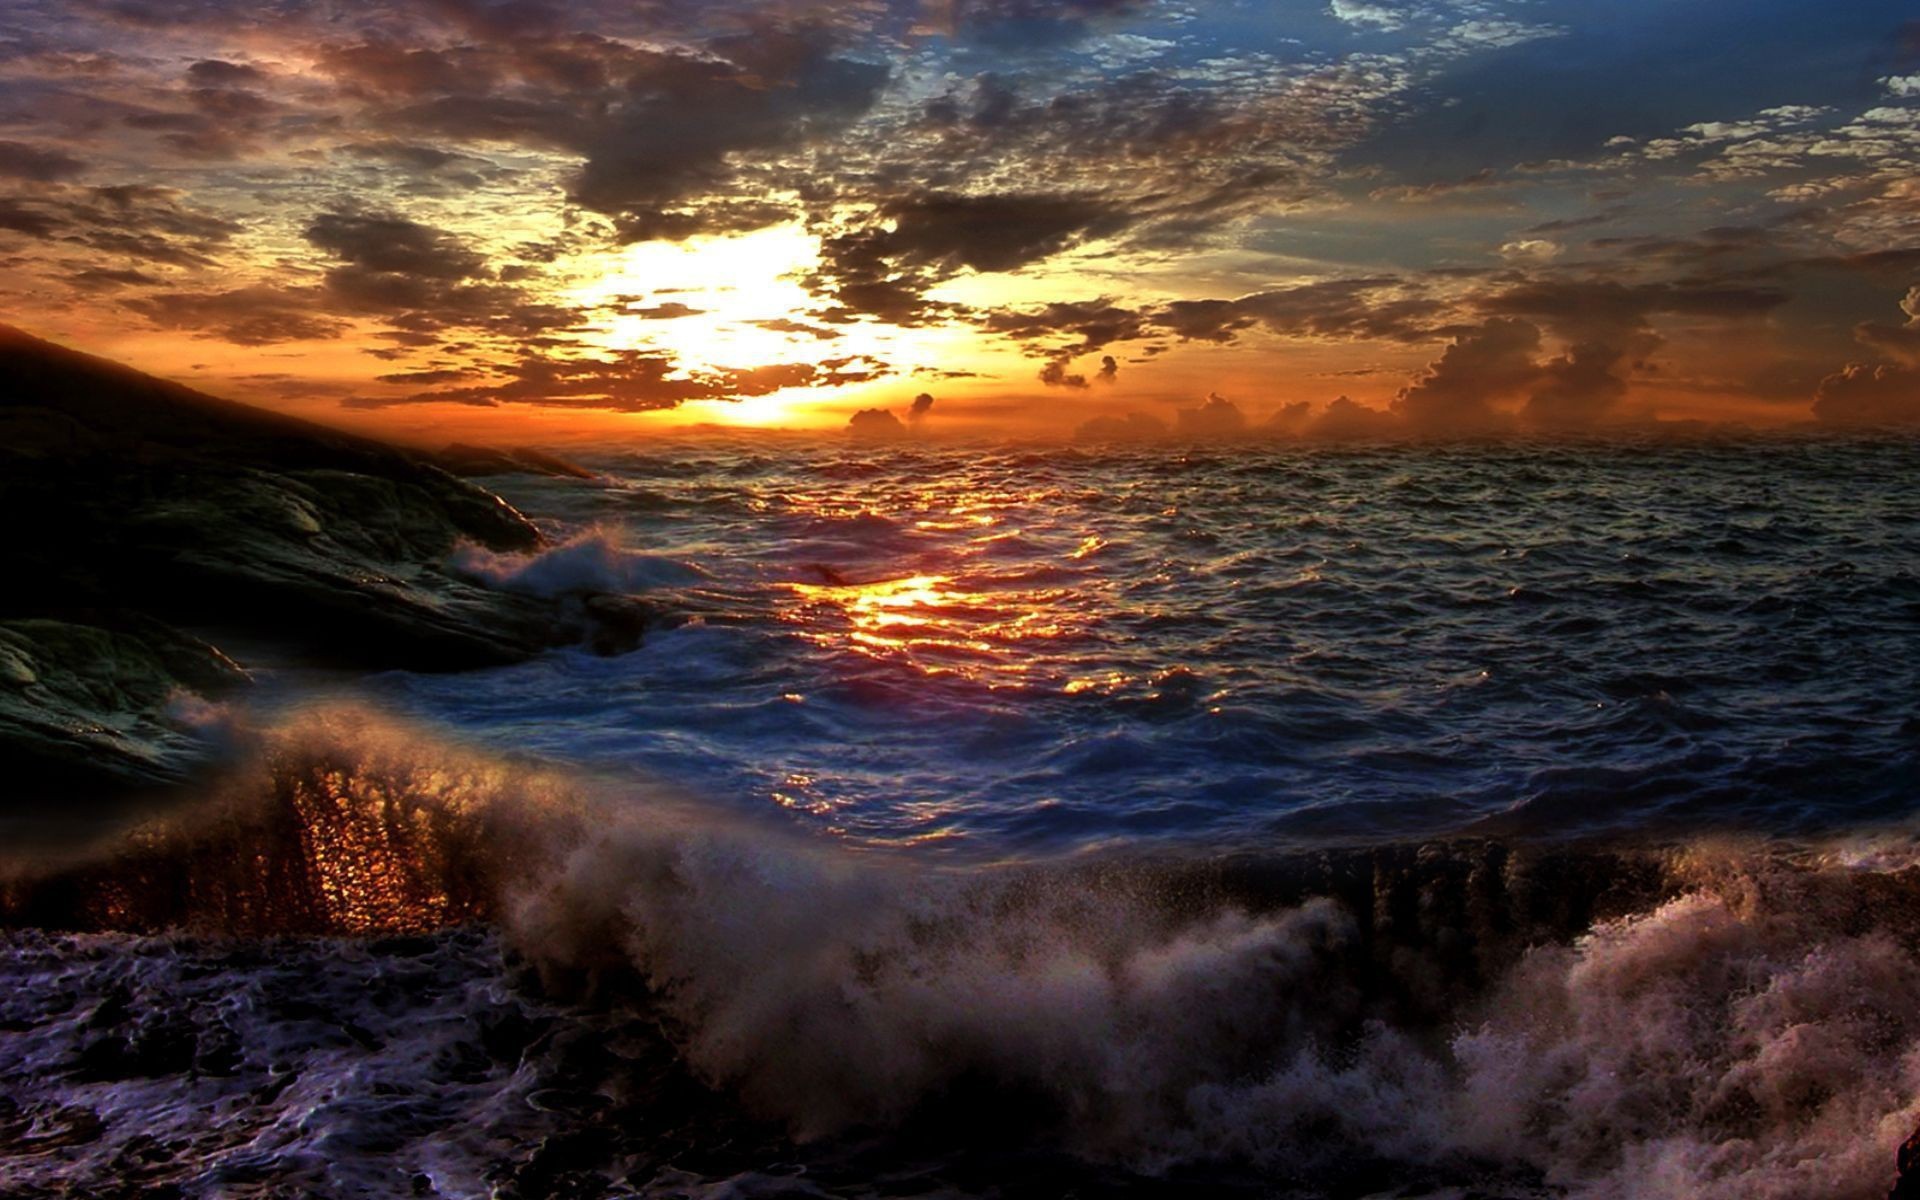 Sunset on a stormy sea